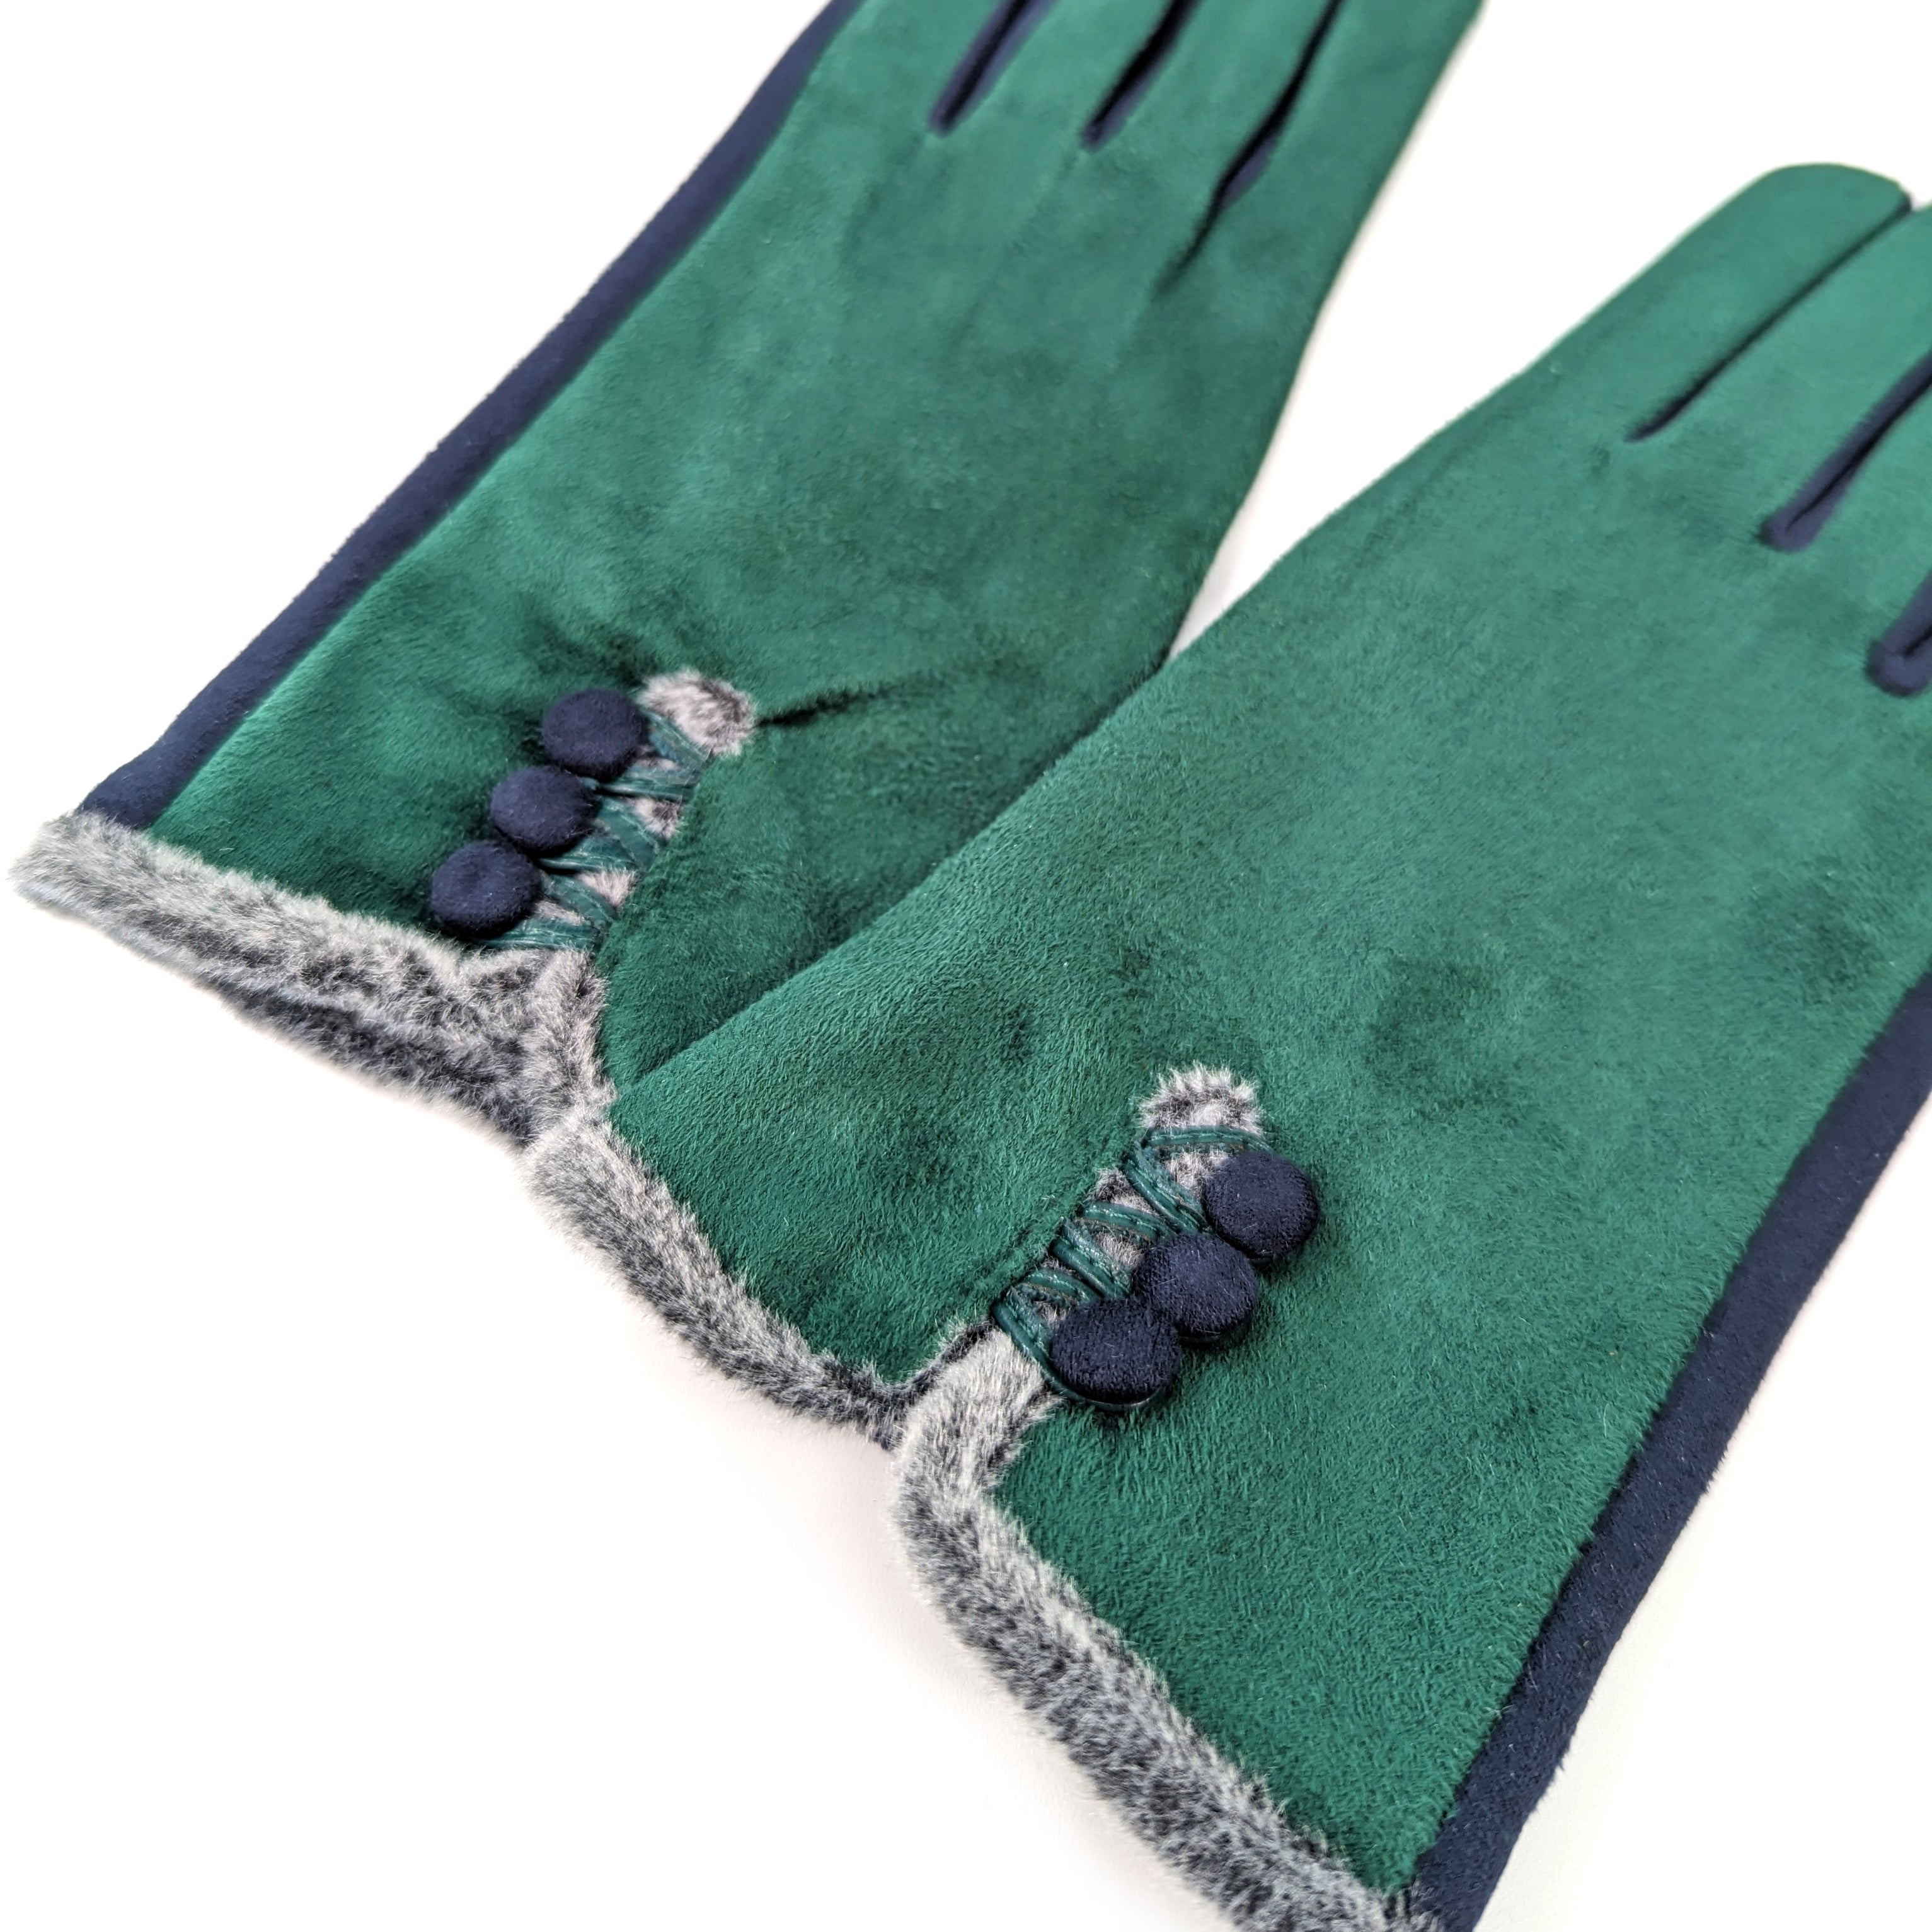 Bicolour Suede Effect Gloves with Faux Fur Trim - Green/Navy